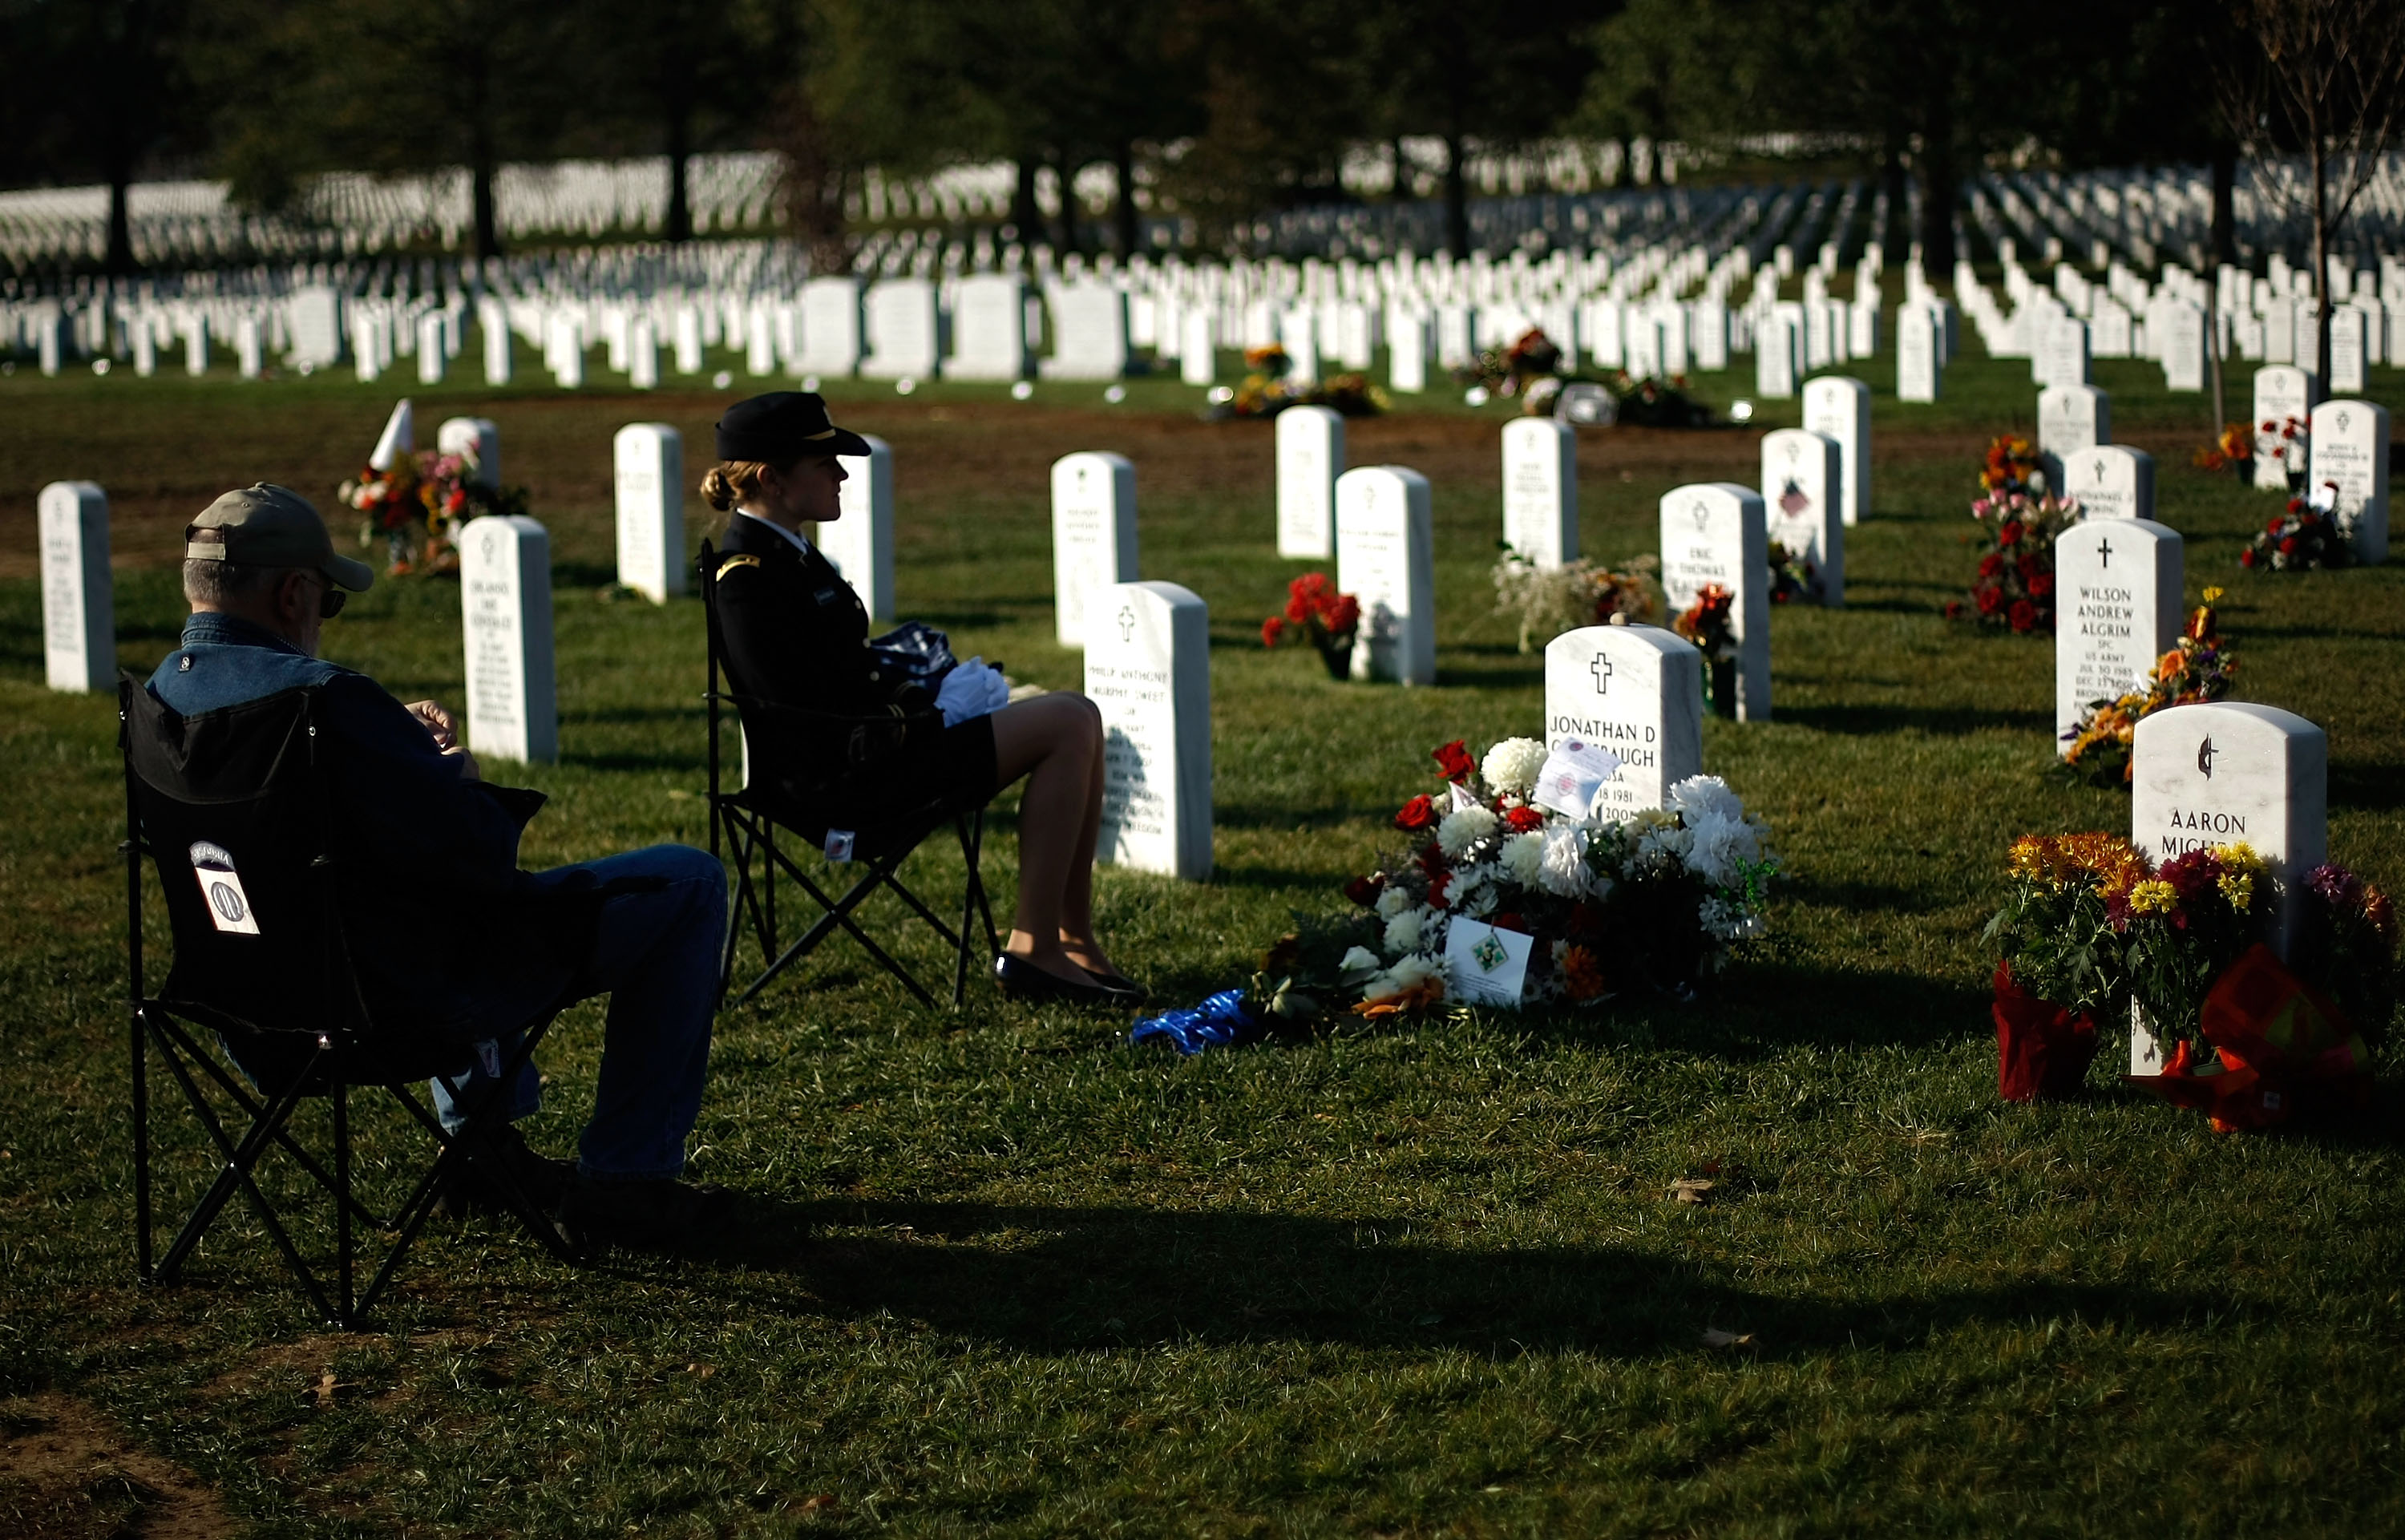 2nd Lieutenant Jenna Grassbaugh (R) and Mark Grassbaugh (L) , visit the gravesite of Captain Jonathan Grassbaugh, husband and son, who was killed in Iraq, at Arlington National Cemetery November 11, 2007 in Arlington, Virginia. Family and friends of U.S. service members across the country remembered the nation's military personnel today on Veterans Day. (Photo by Win McNamee/Getty Images)